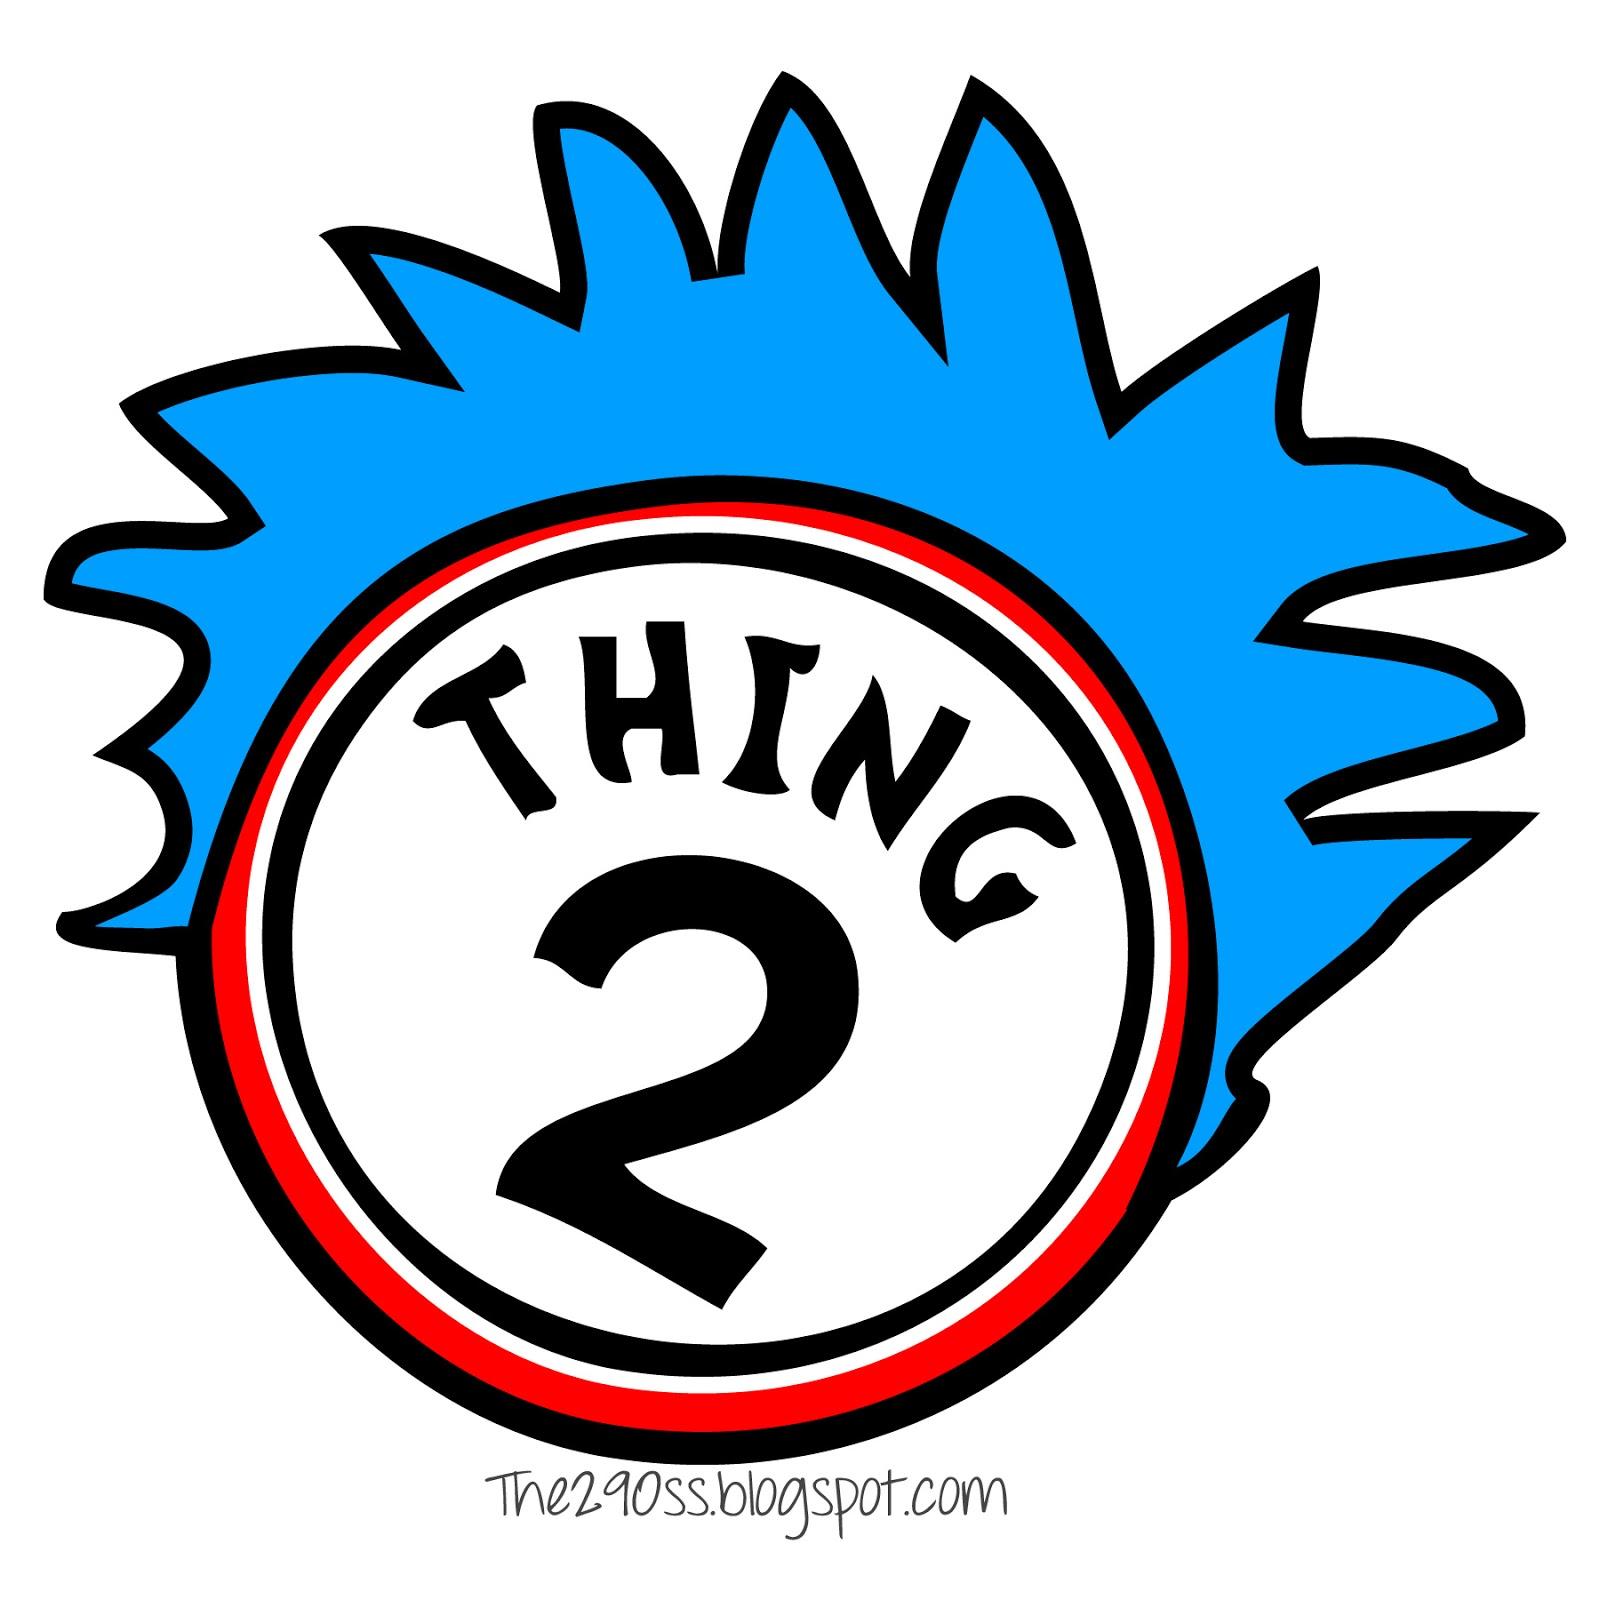 thing-1-and-thing-2-clip-art-tumundografico-clipart-best-clipart-best-images-and-photos-finder